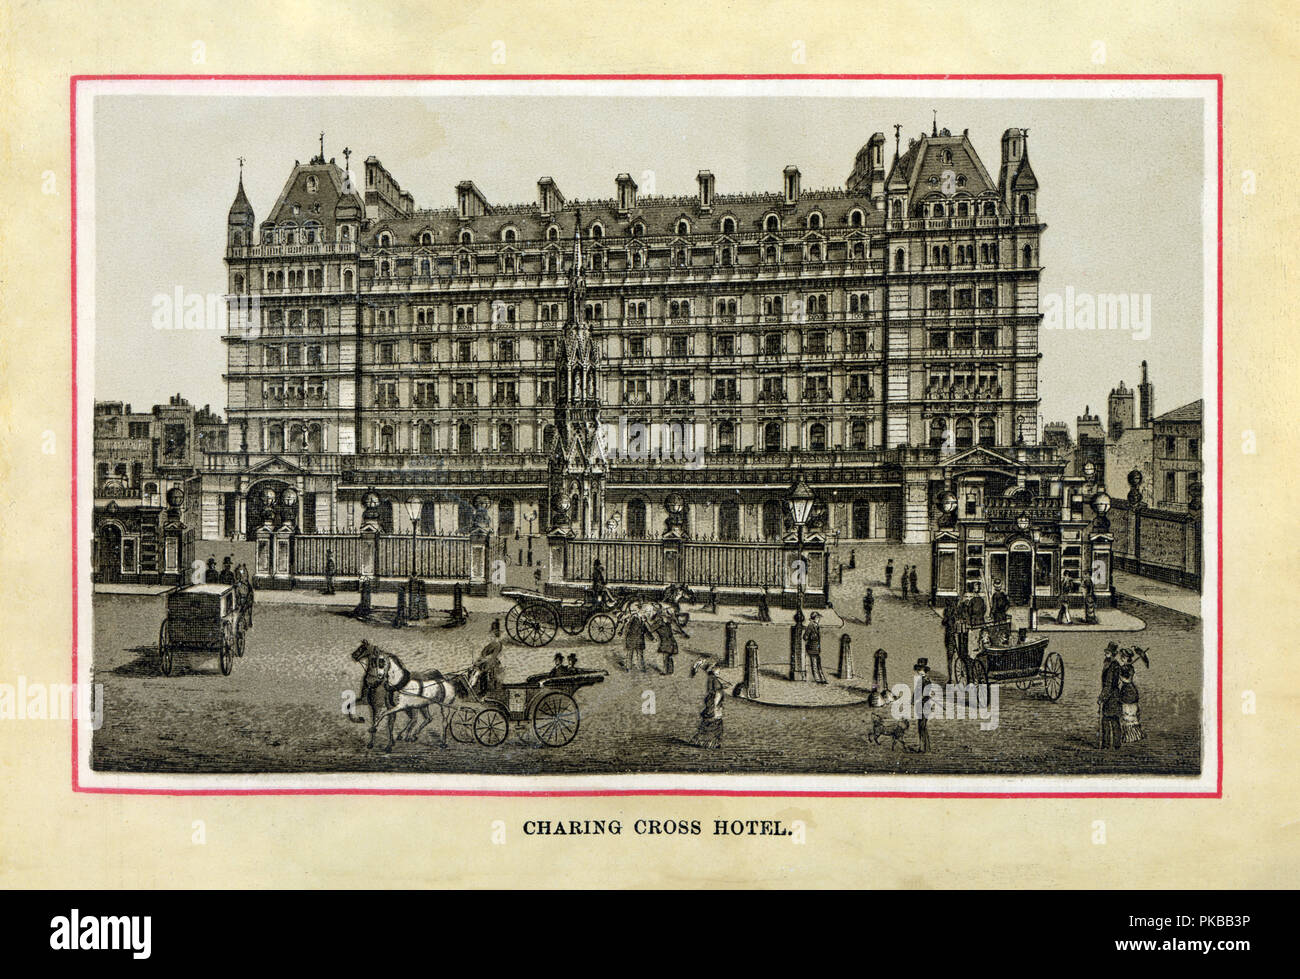 Charing Cross Hotel, 1880 high quality steel engraving of the railway station hotel designed by Edward Middleton Barry opened on 15 May 1865 with 250 bedrooms on the corner of the Strand and Villers Street across from Trafalgar Square Stock Photo